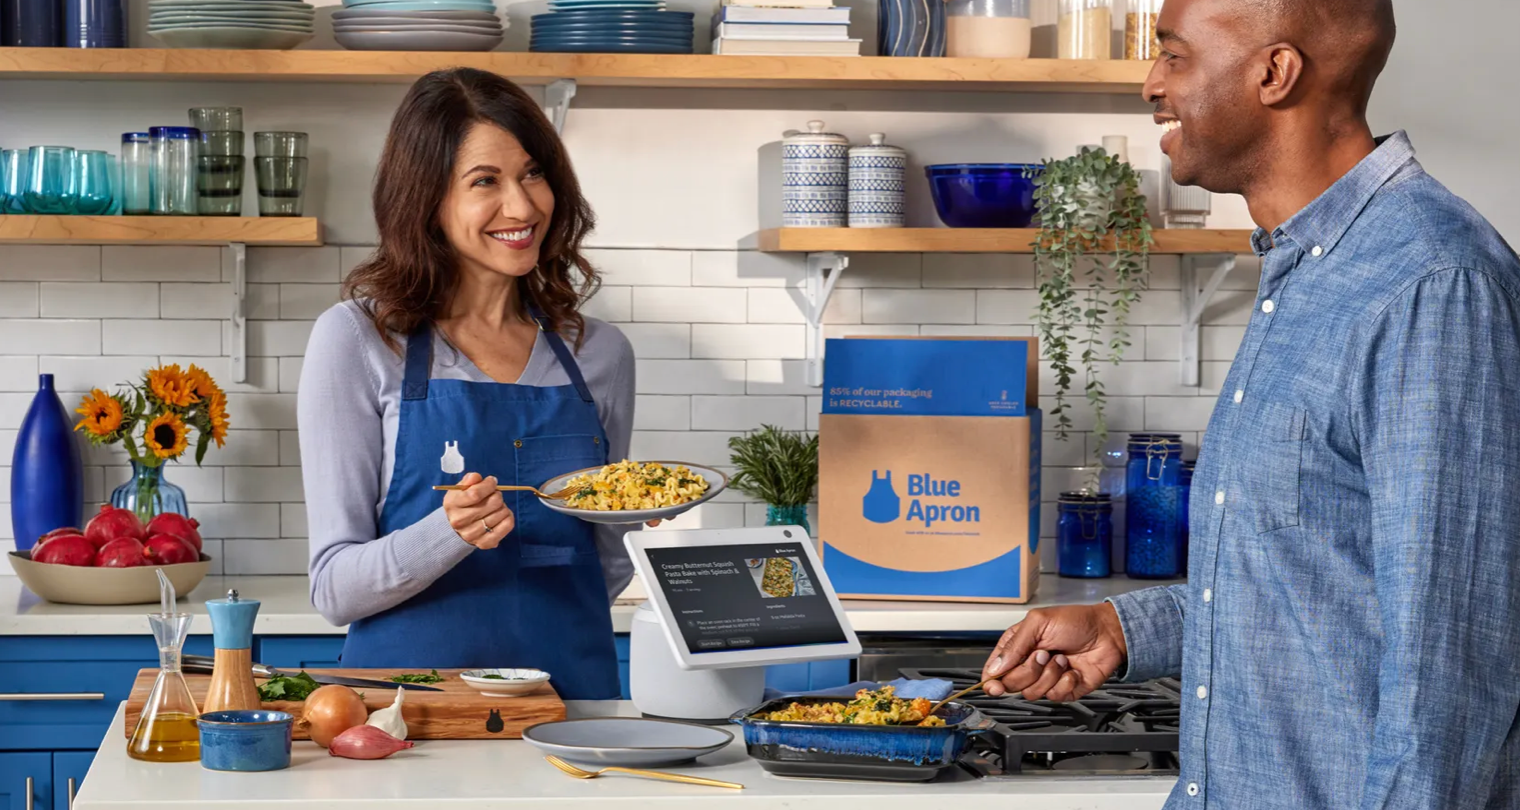 Blue Apron Stock Is Surging Today: What's Going On?